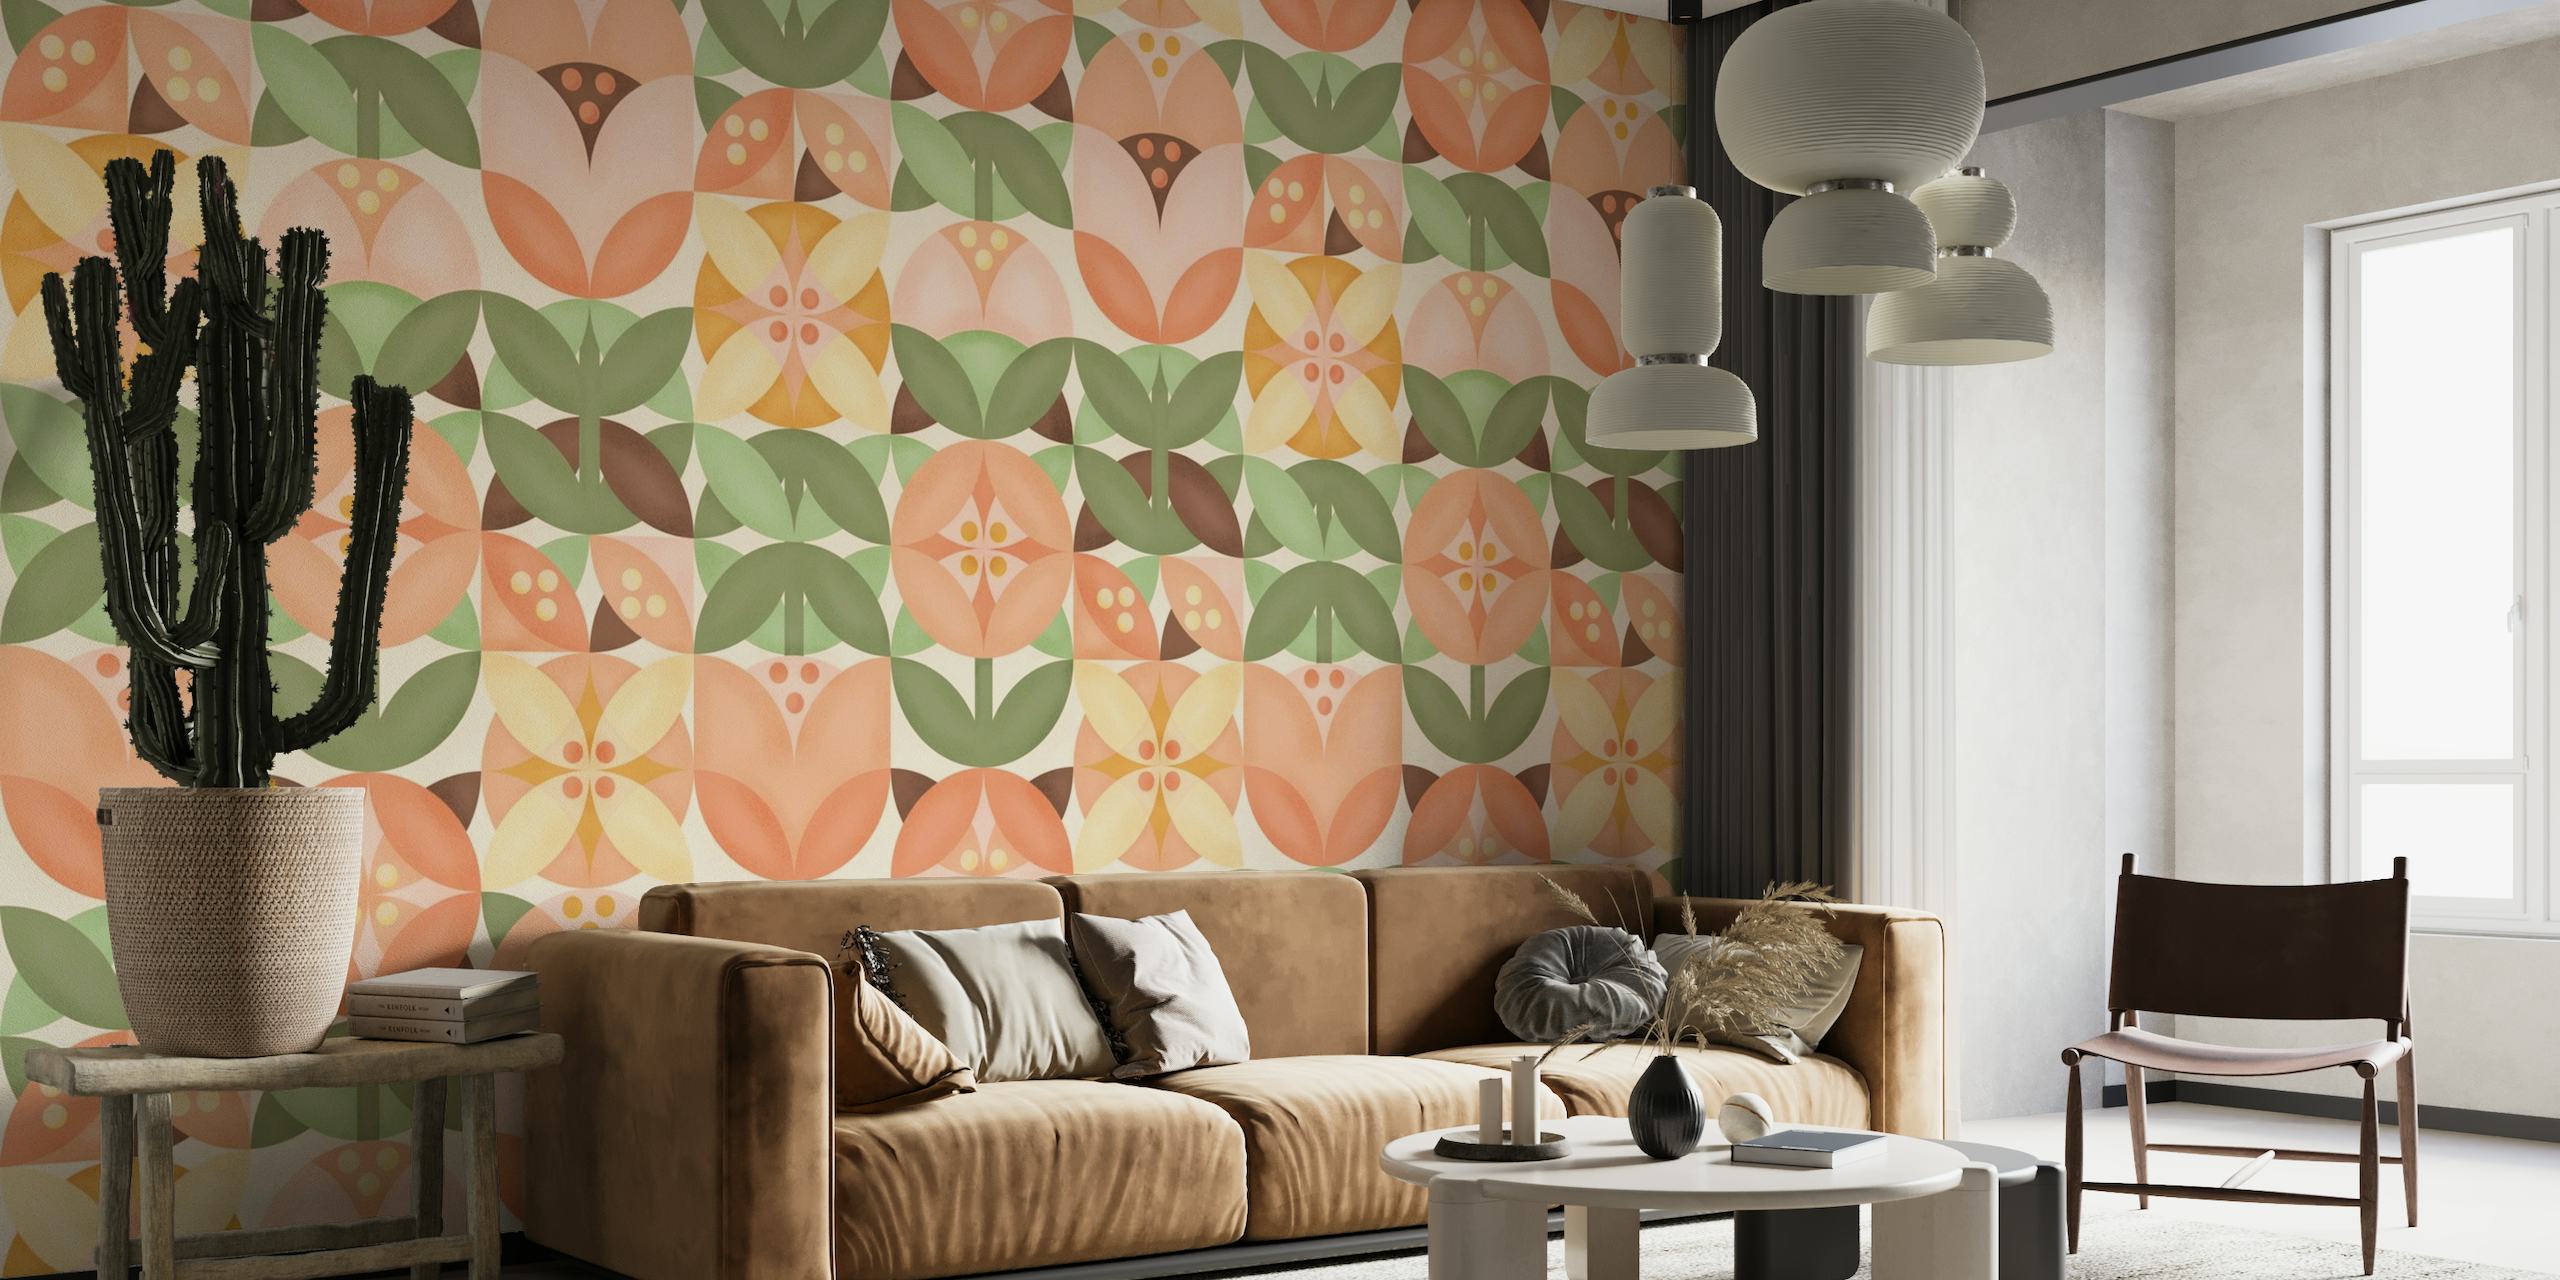 Mid-Century Modern Floral Wall Mural with Big Flowers in Earth Tones